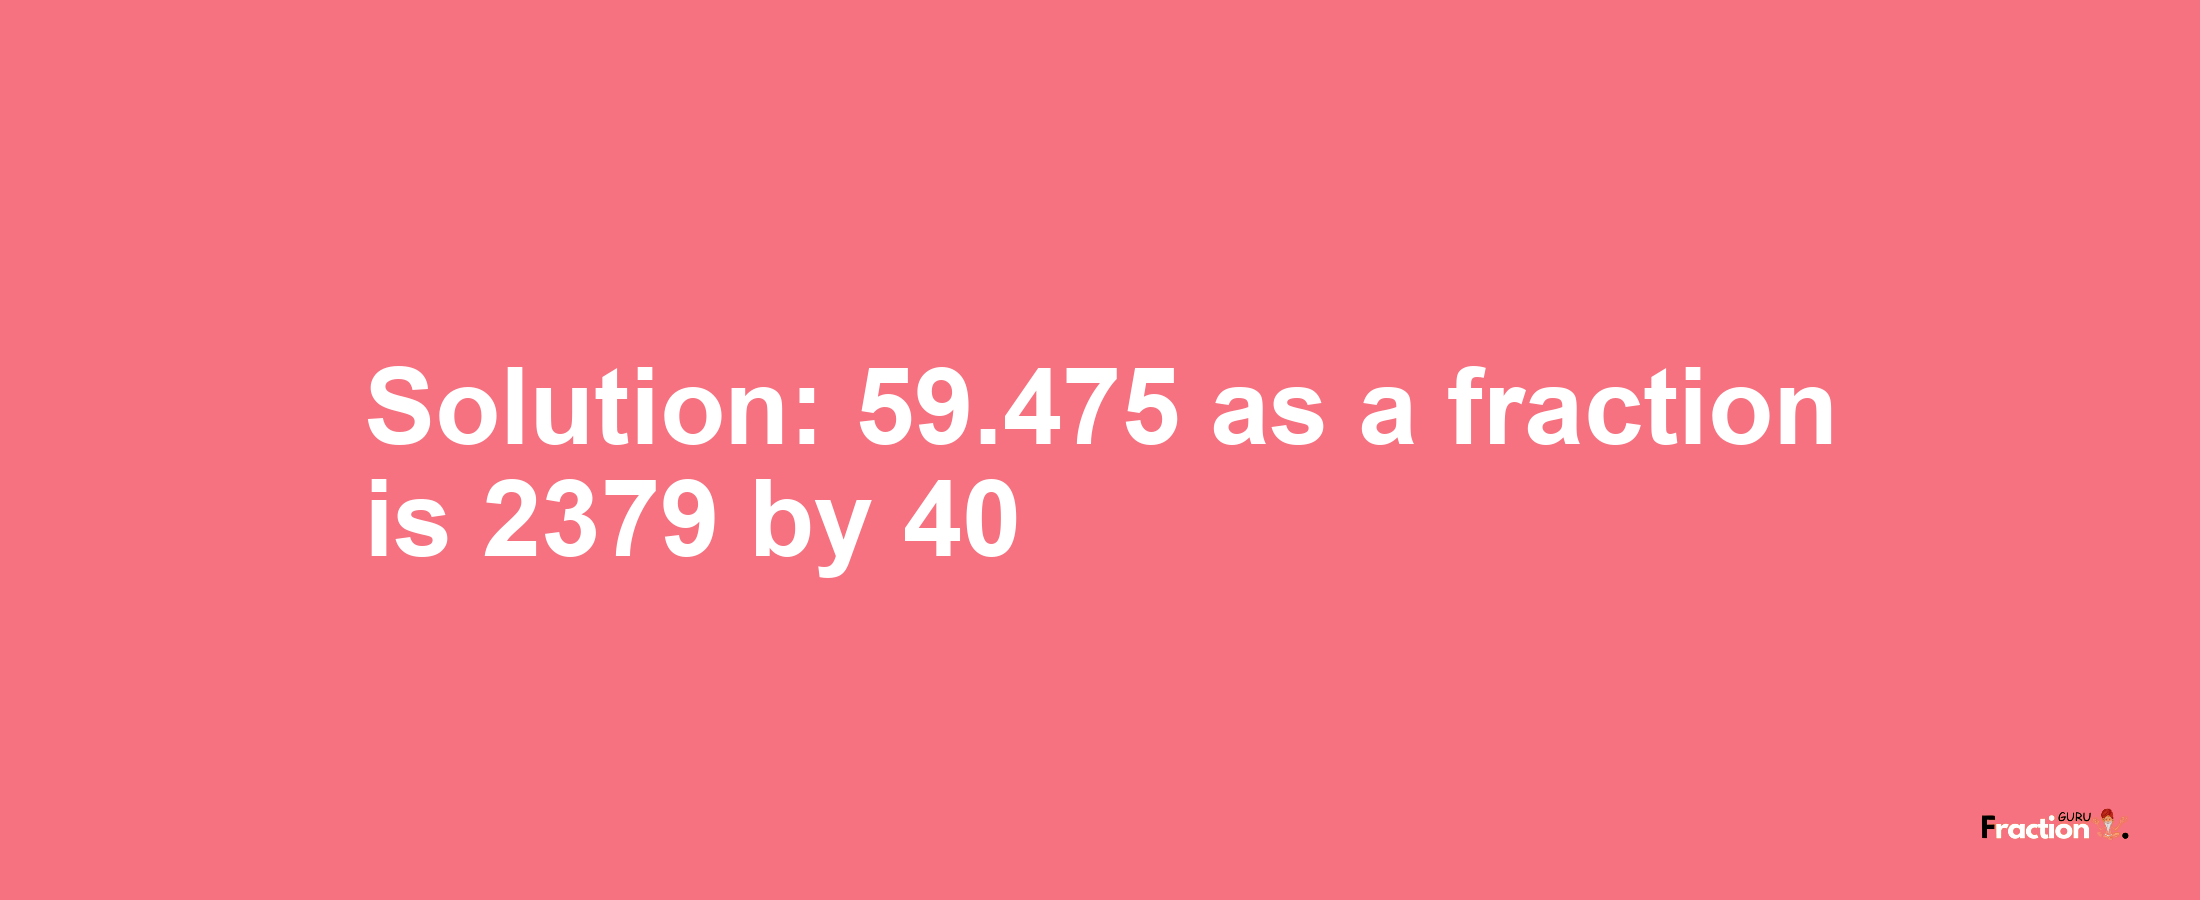 Solution:59.475 as a fraction is 2379/40